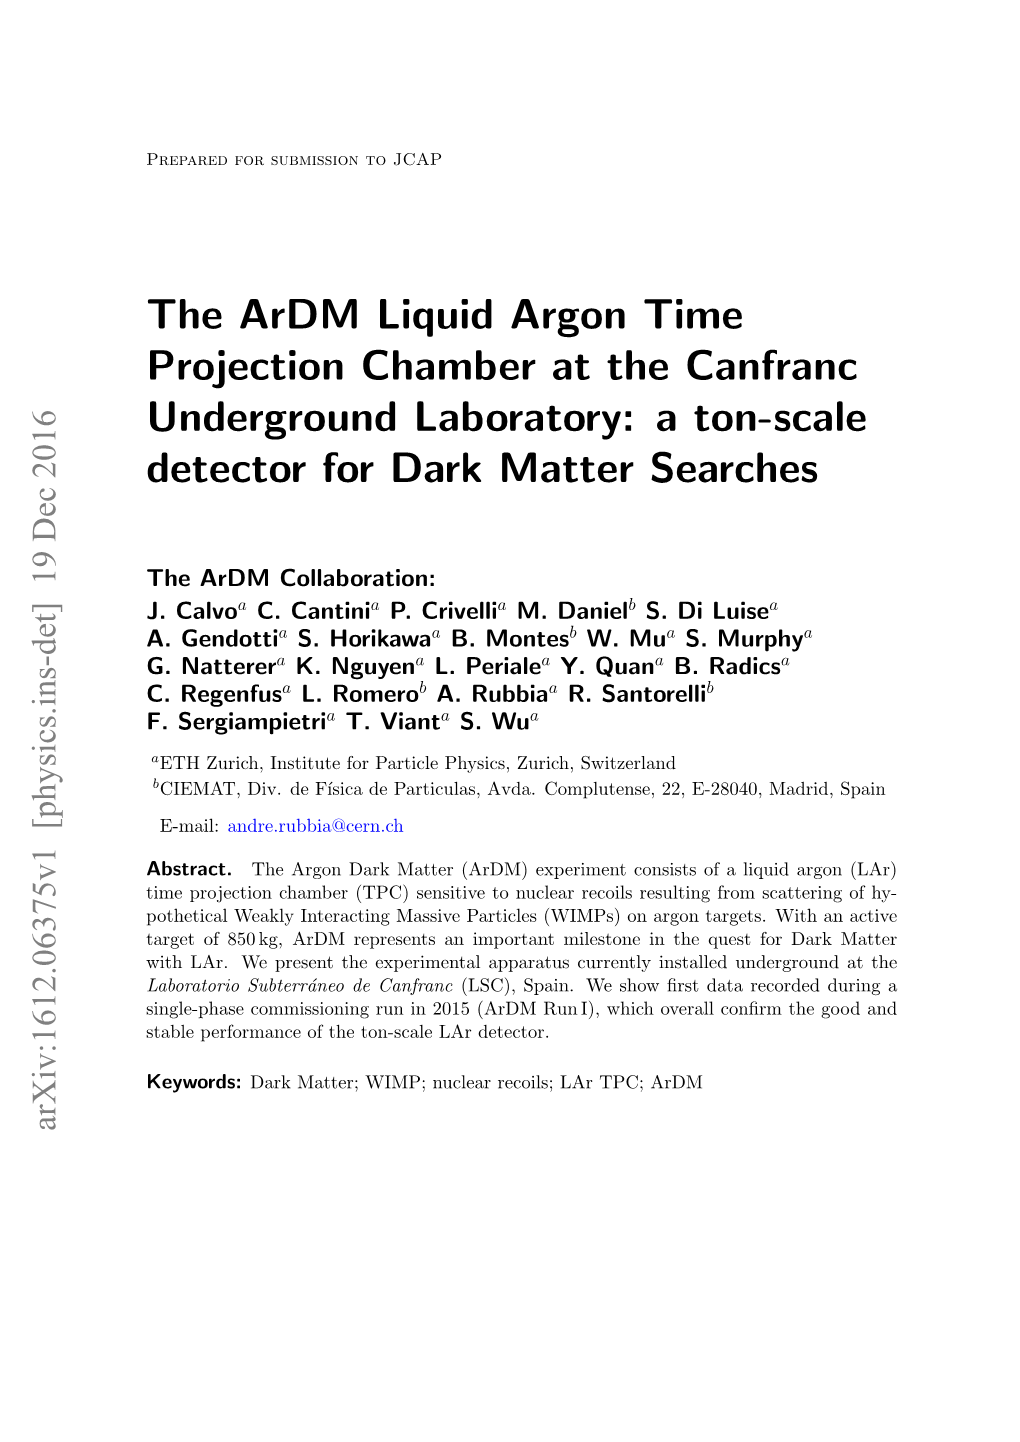 The Ardm Liquid Argon Time Projection Chamber at the Canfranc Underground Laboratory: a Ton-Scale Detector for Dark Matter Searches